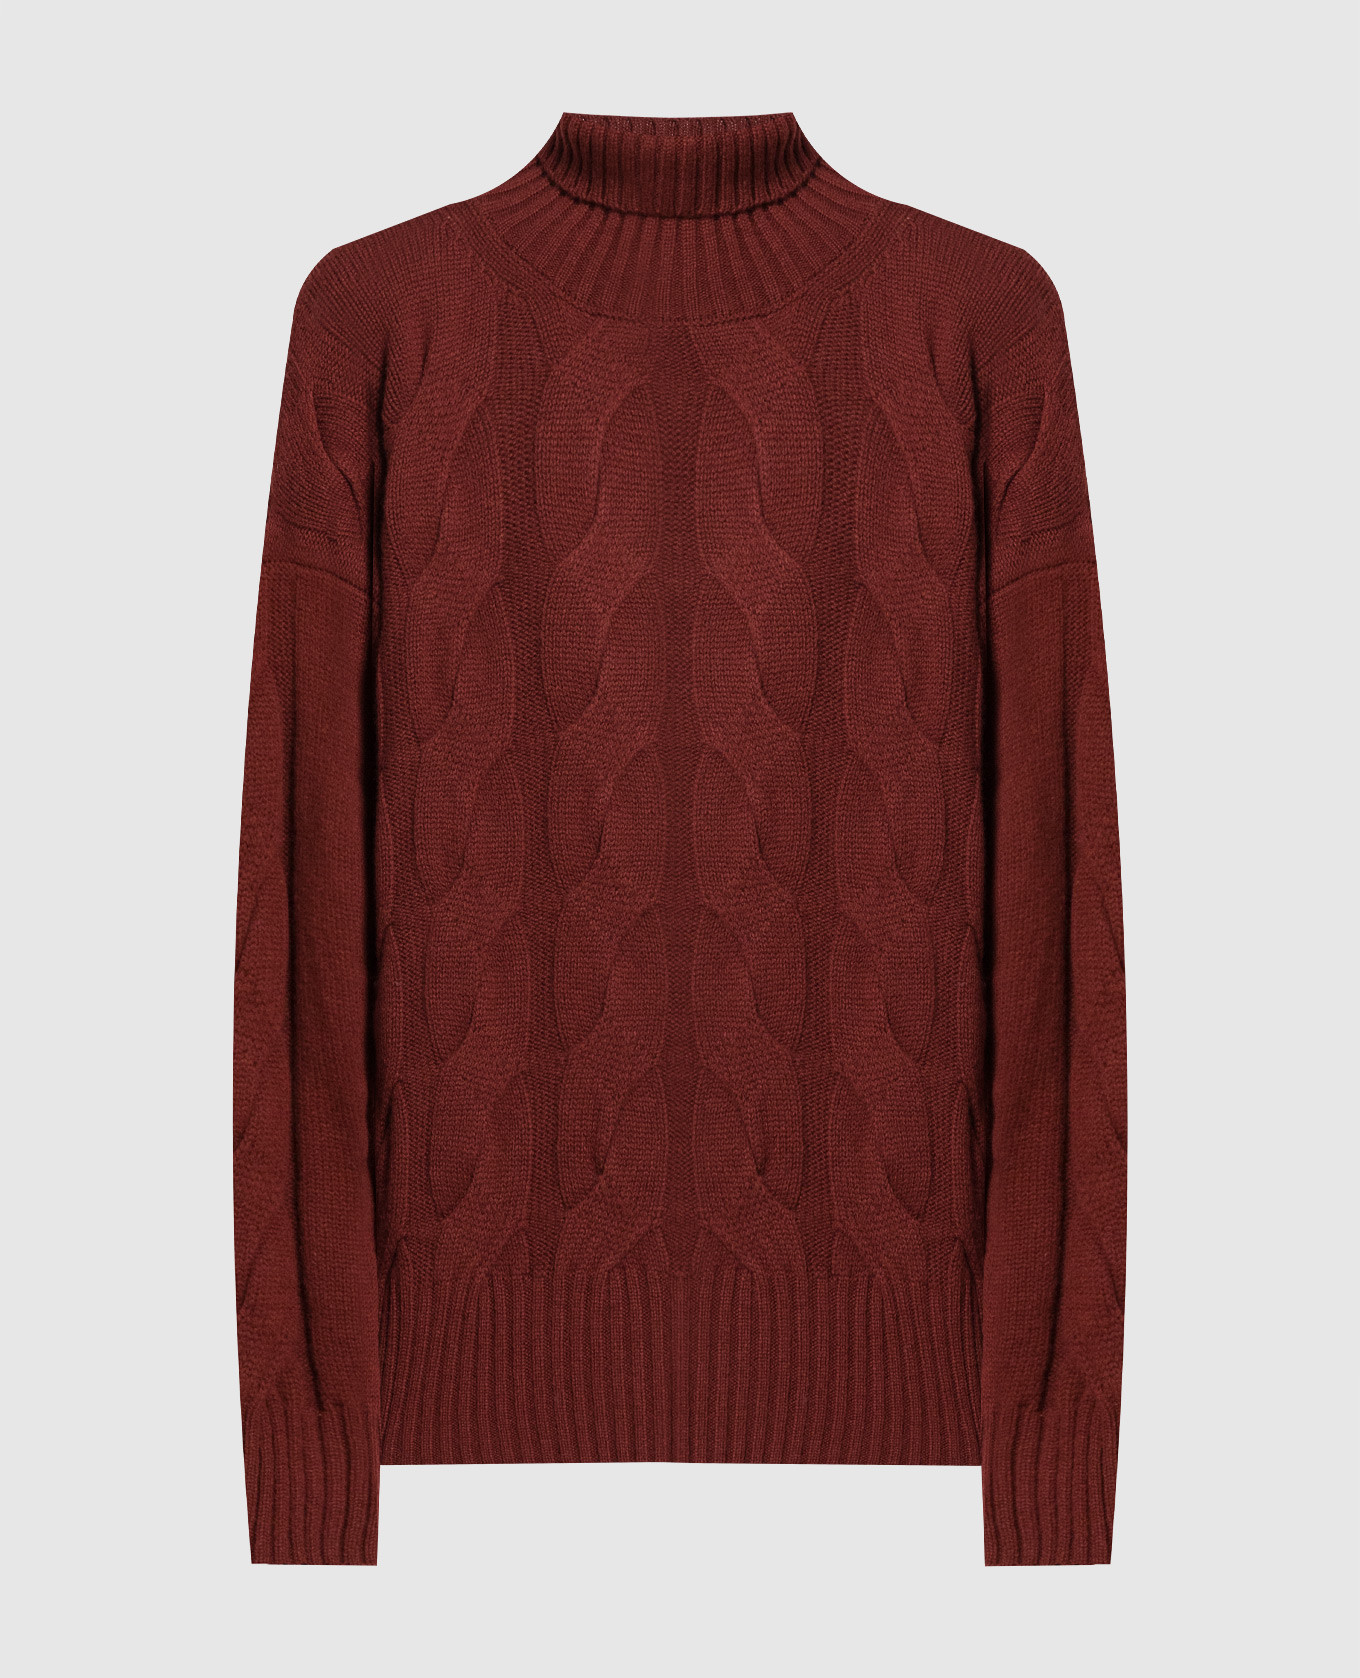 Burgundy sweater made of wool and cashmere with a textured pattern